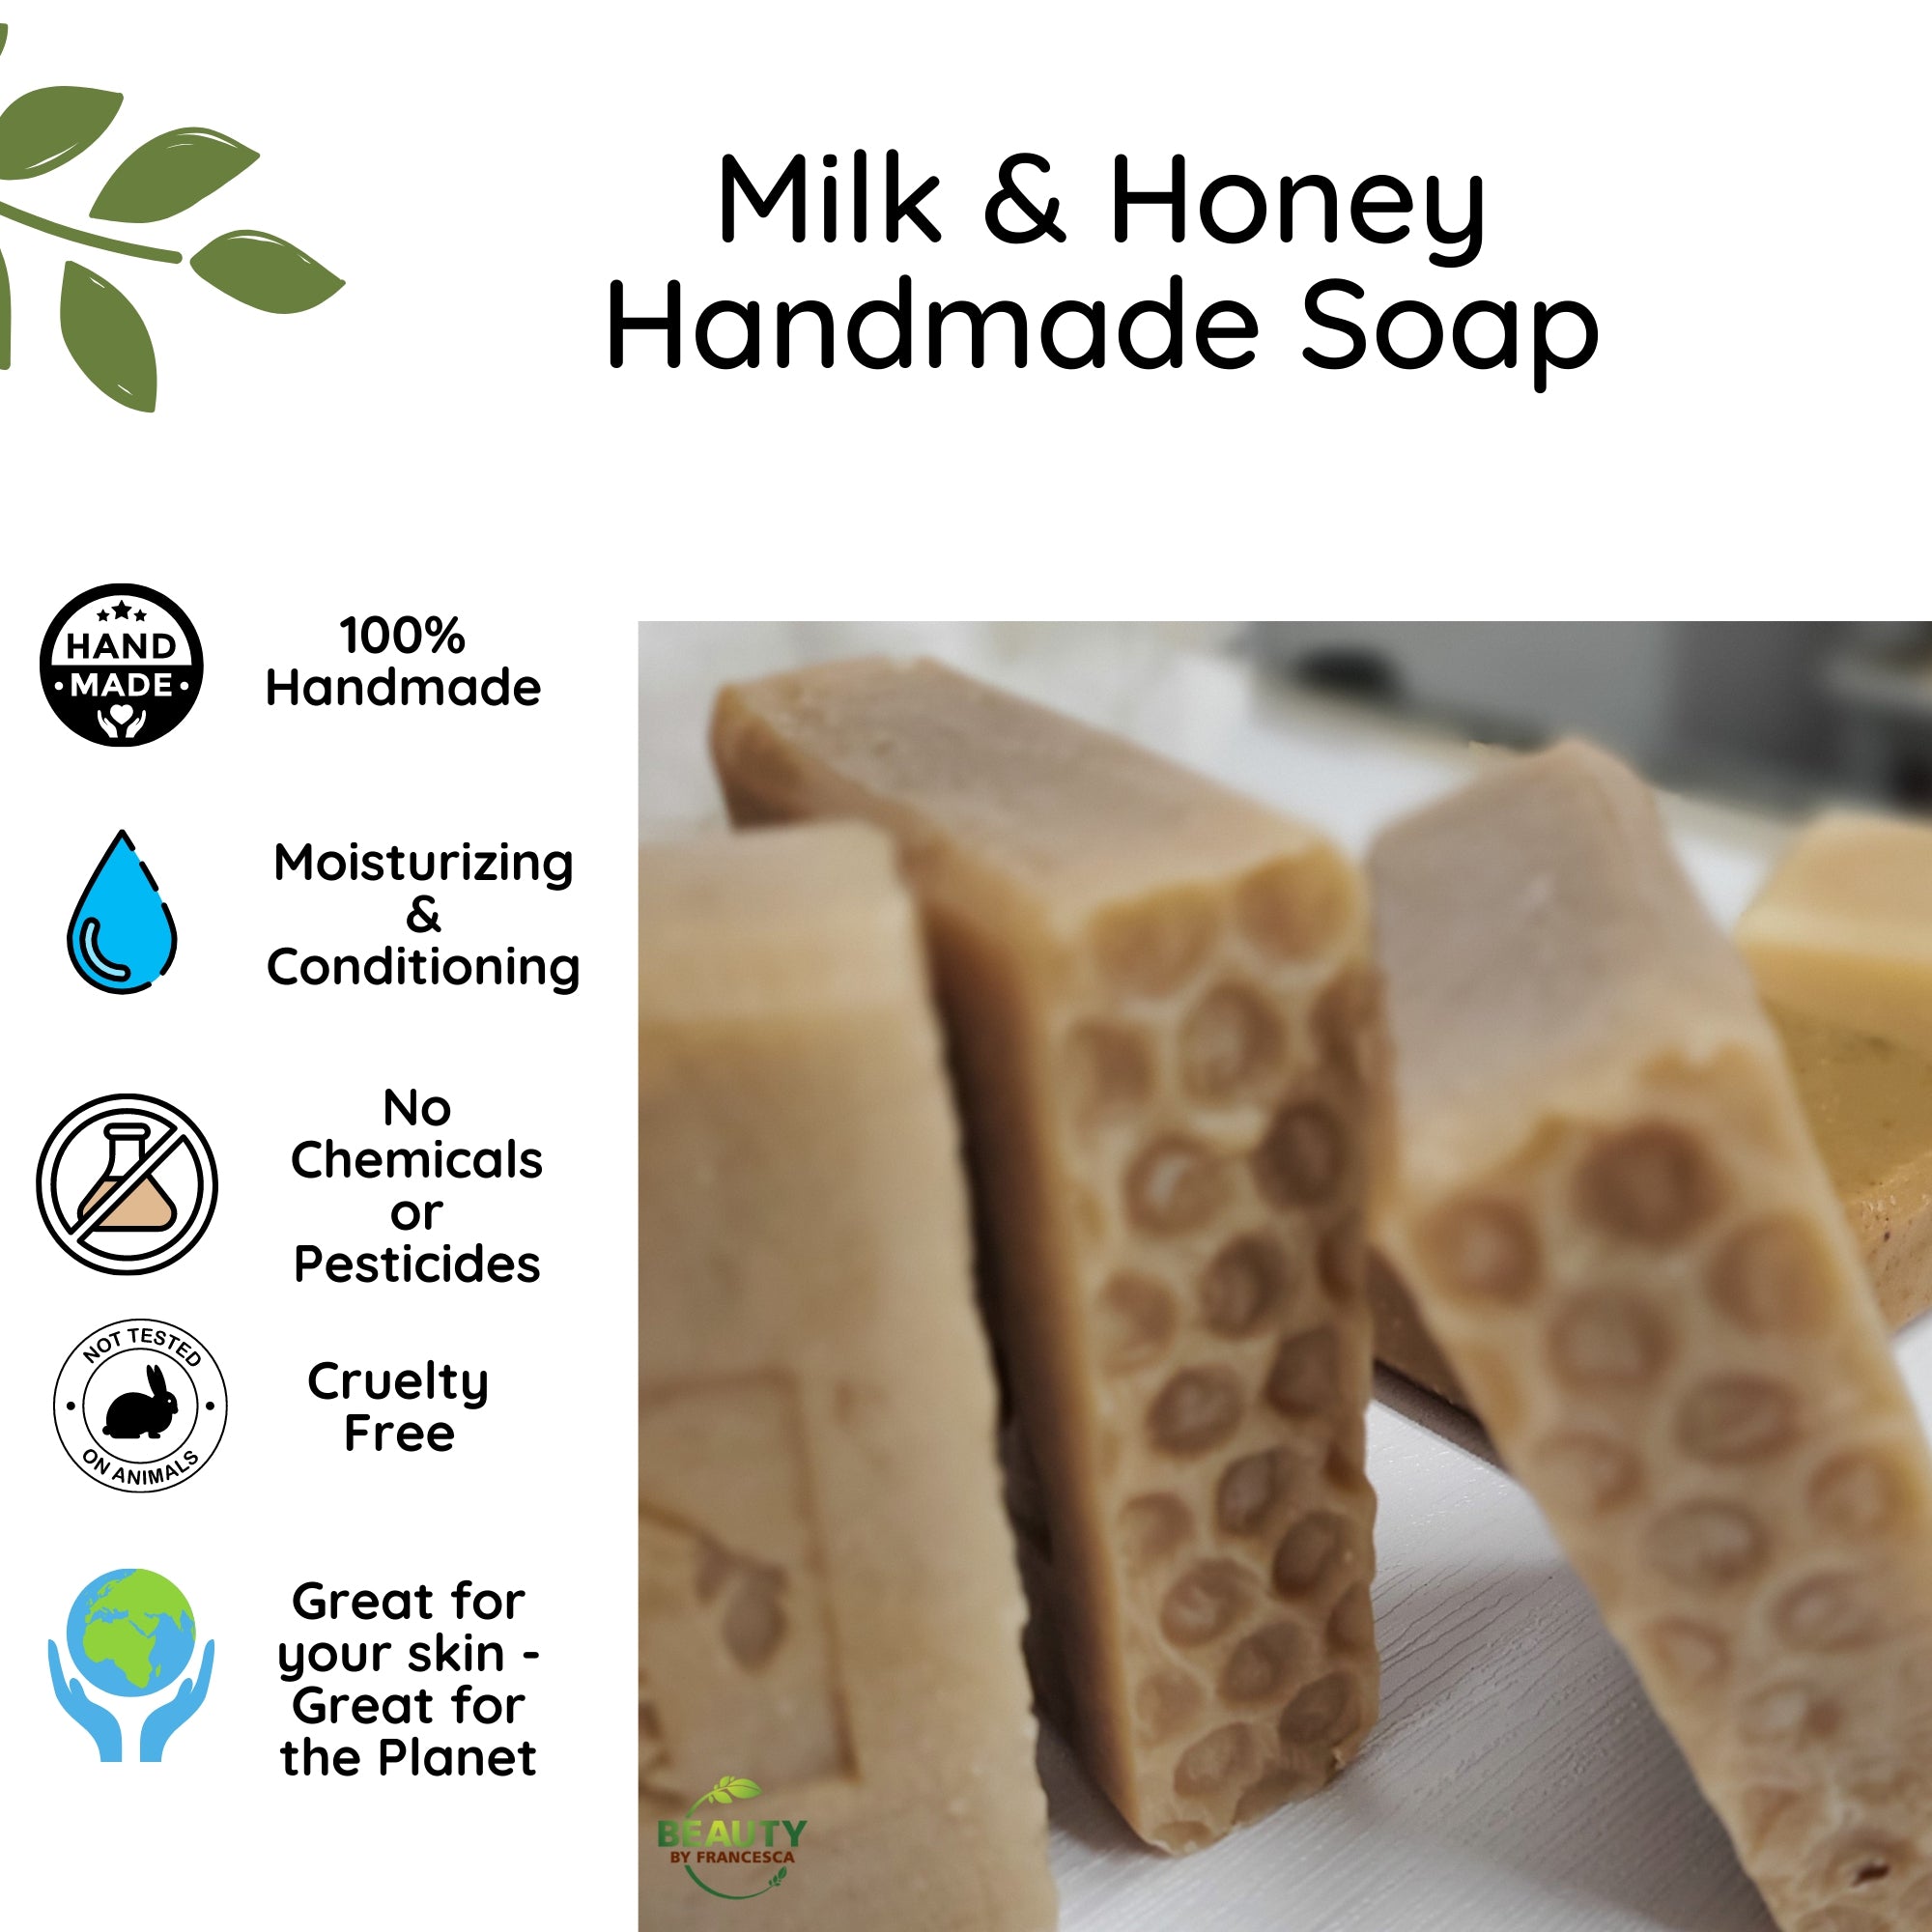 Milk and Honey Handmade Soap Benefits Card Great for skin and planet no chemicals